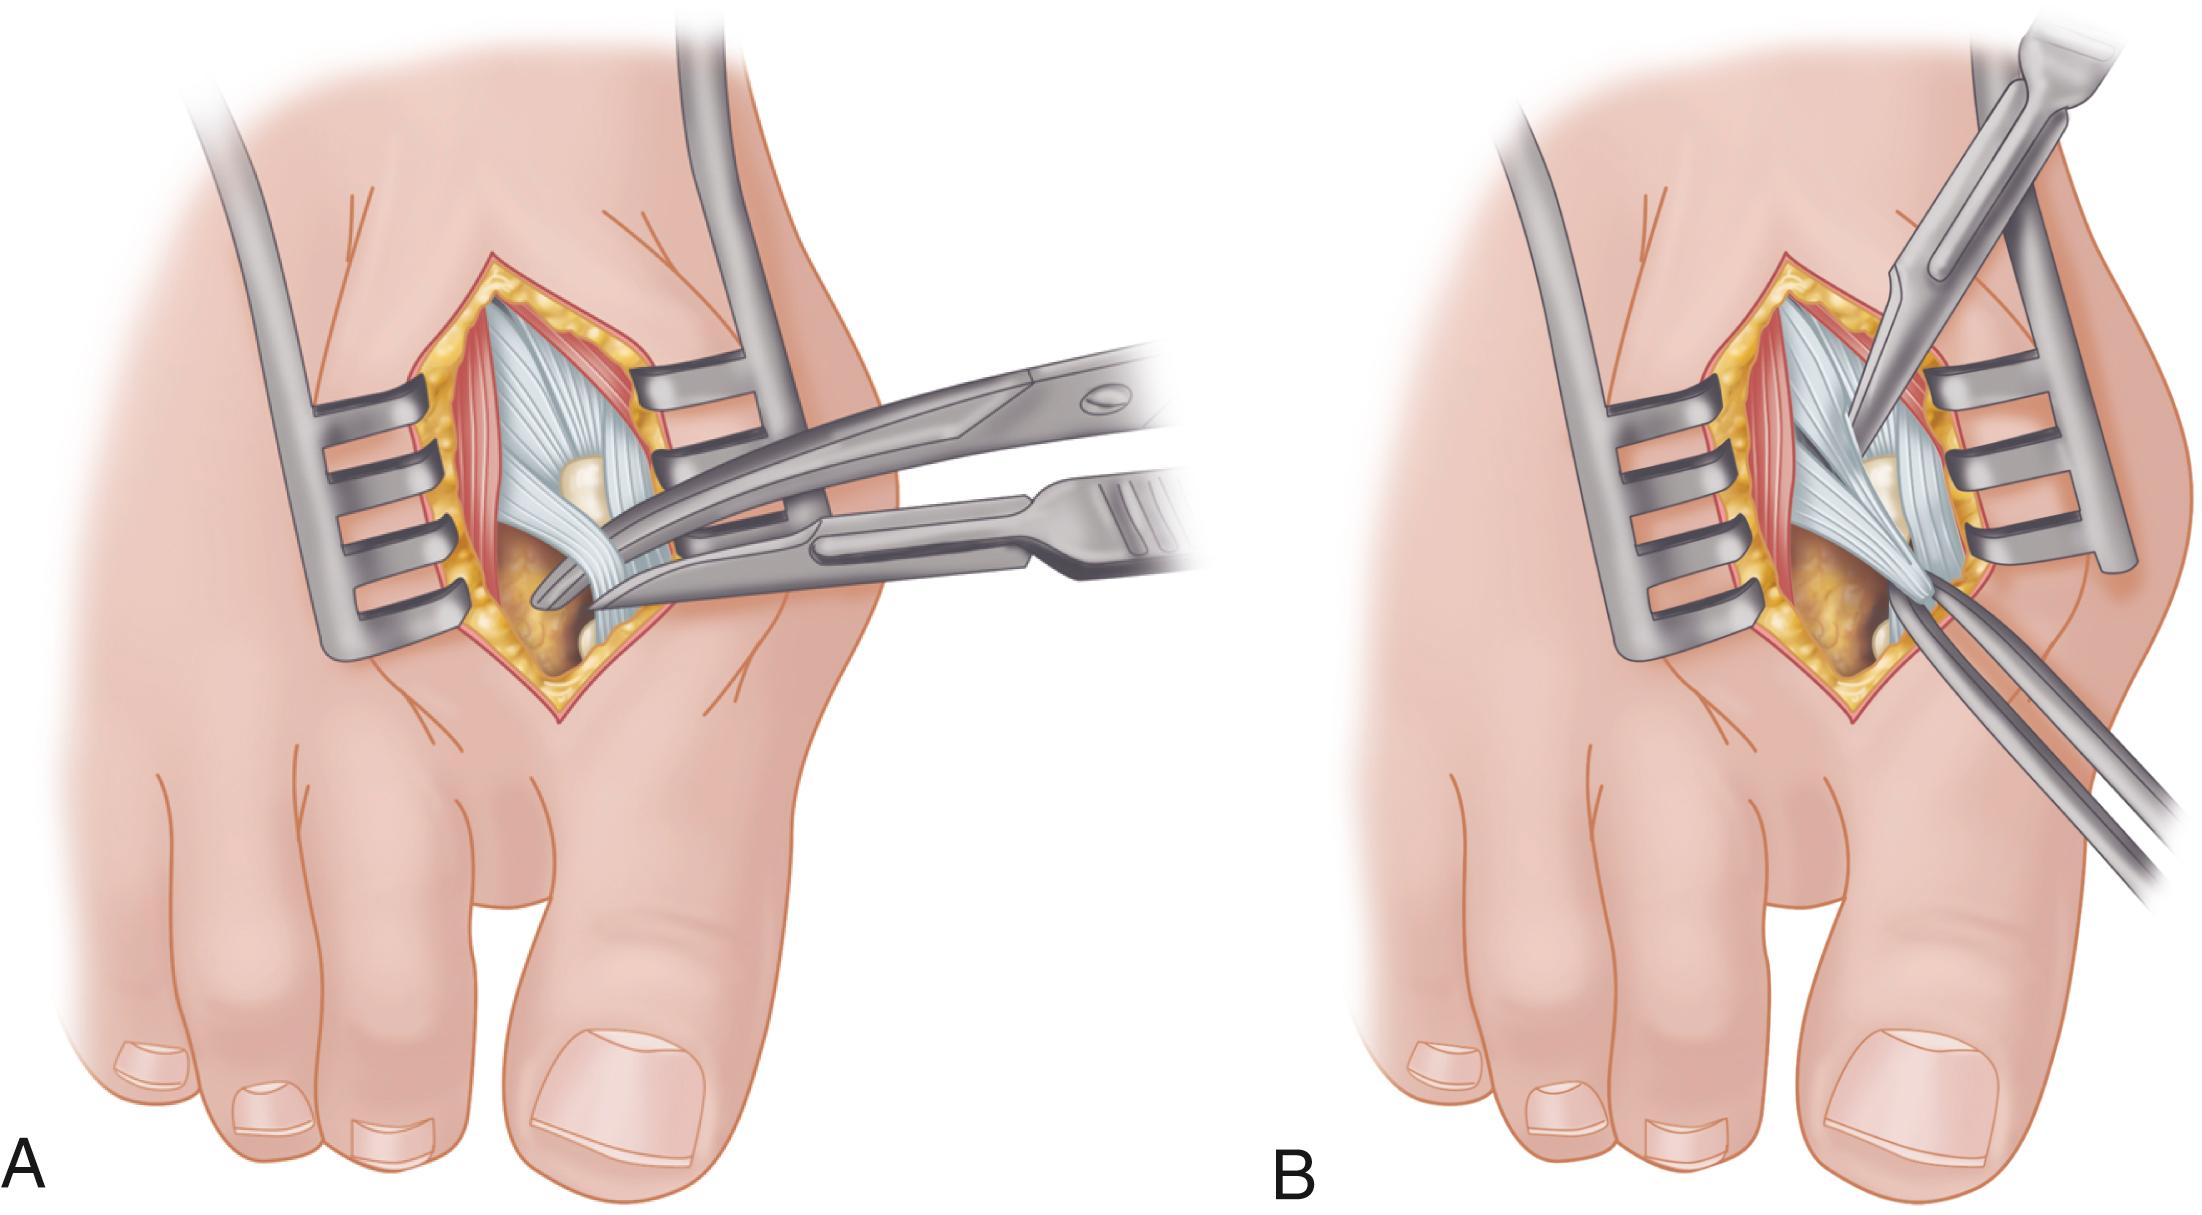 FIGURE 82.19, Modified McBride procedure. A and B, Adductor hallucis is exposed and released (see text). SEE TECHNIQUE 82.1.